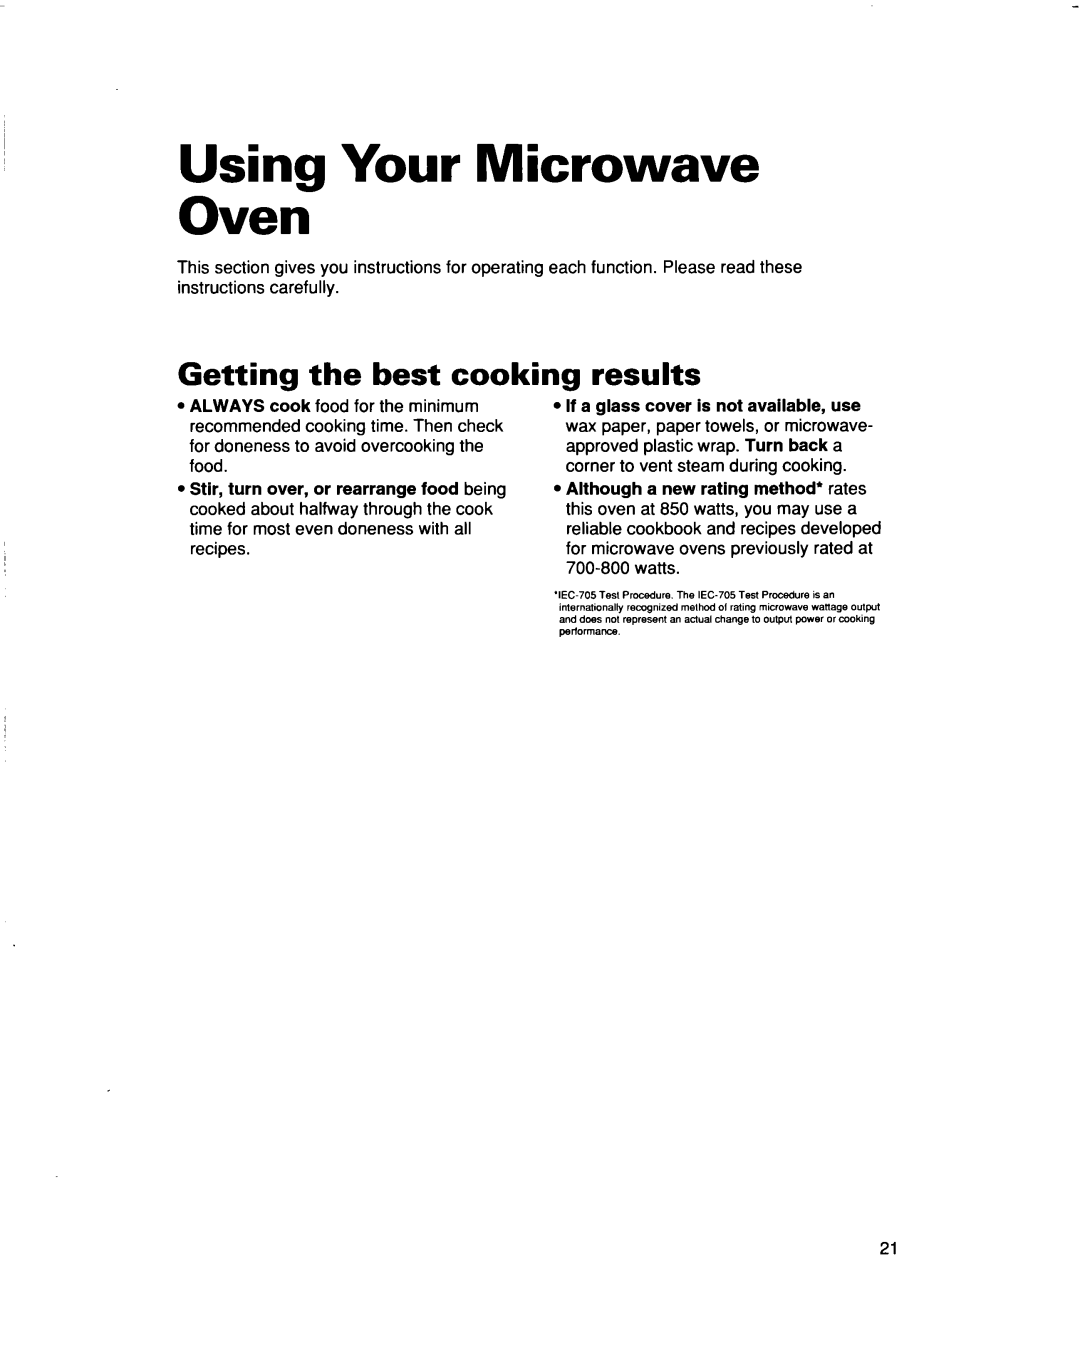 Whirlpool MHEI IRD warranty Using Your Microwave Oven, Getting the best cooking, results 